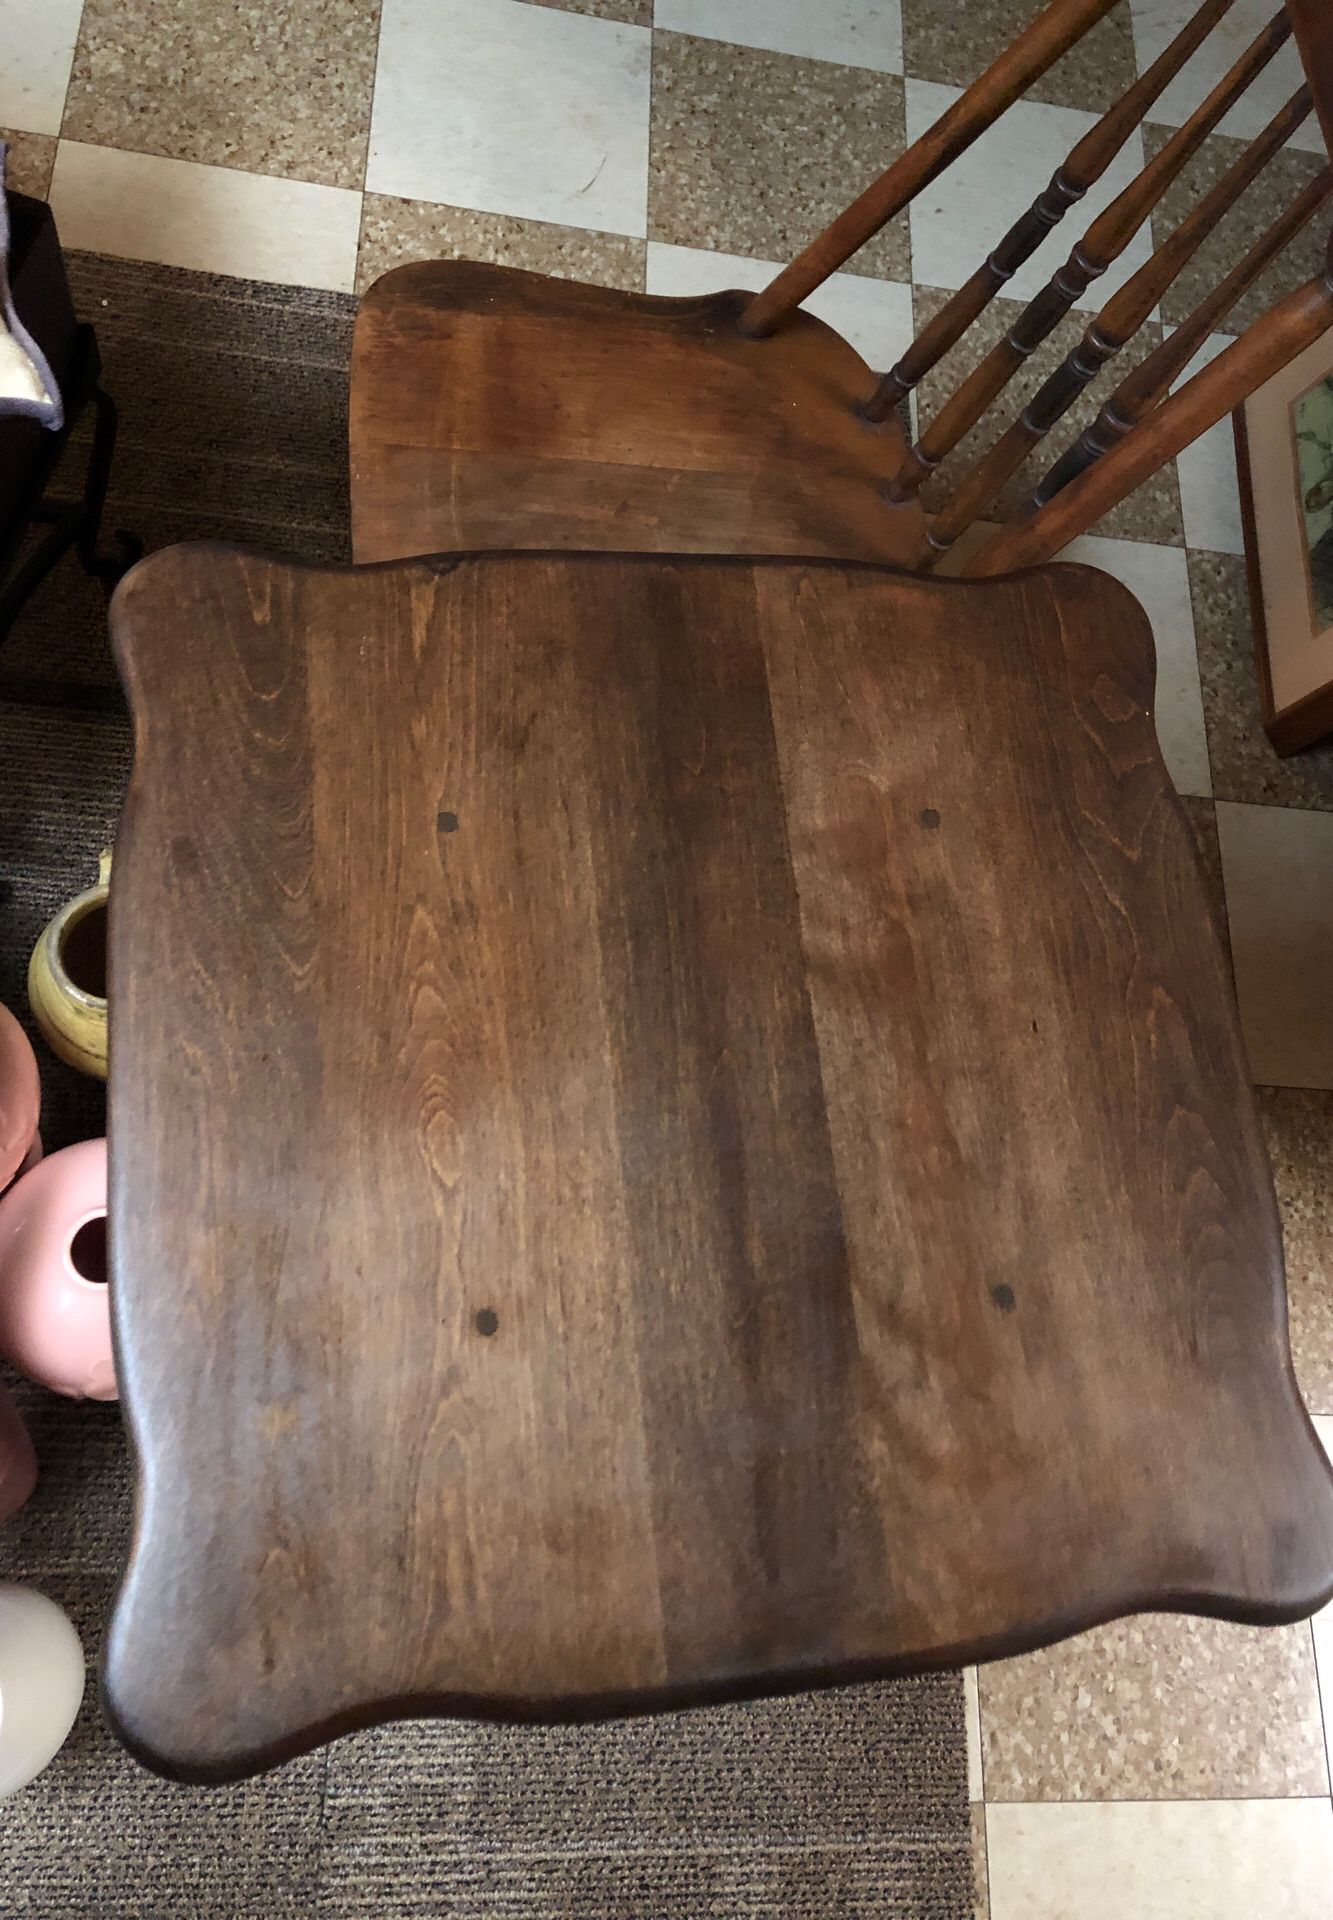 Antique table and chair,